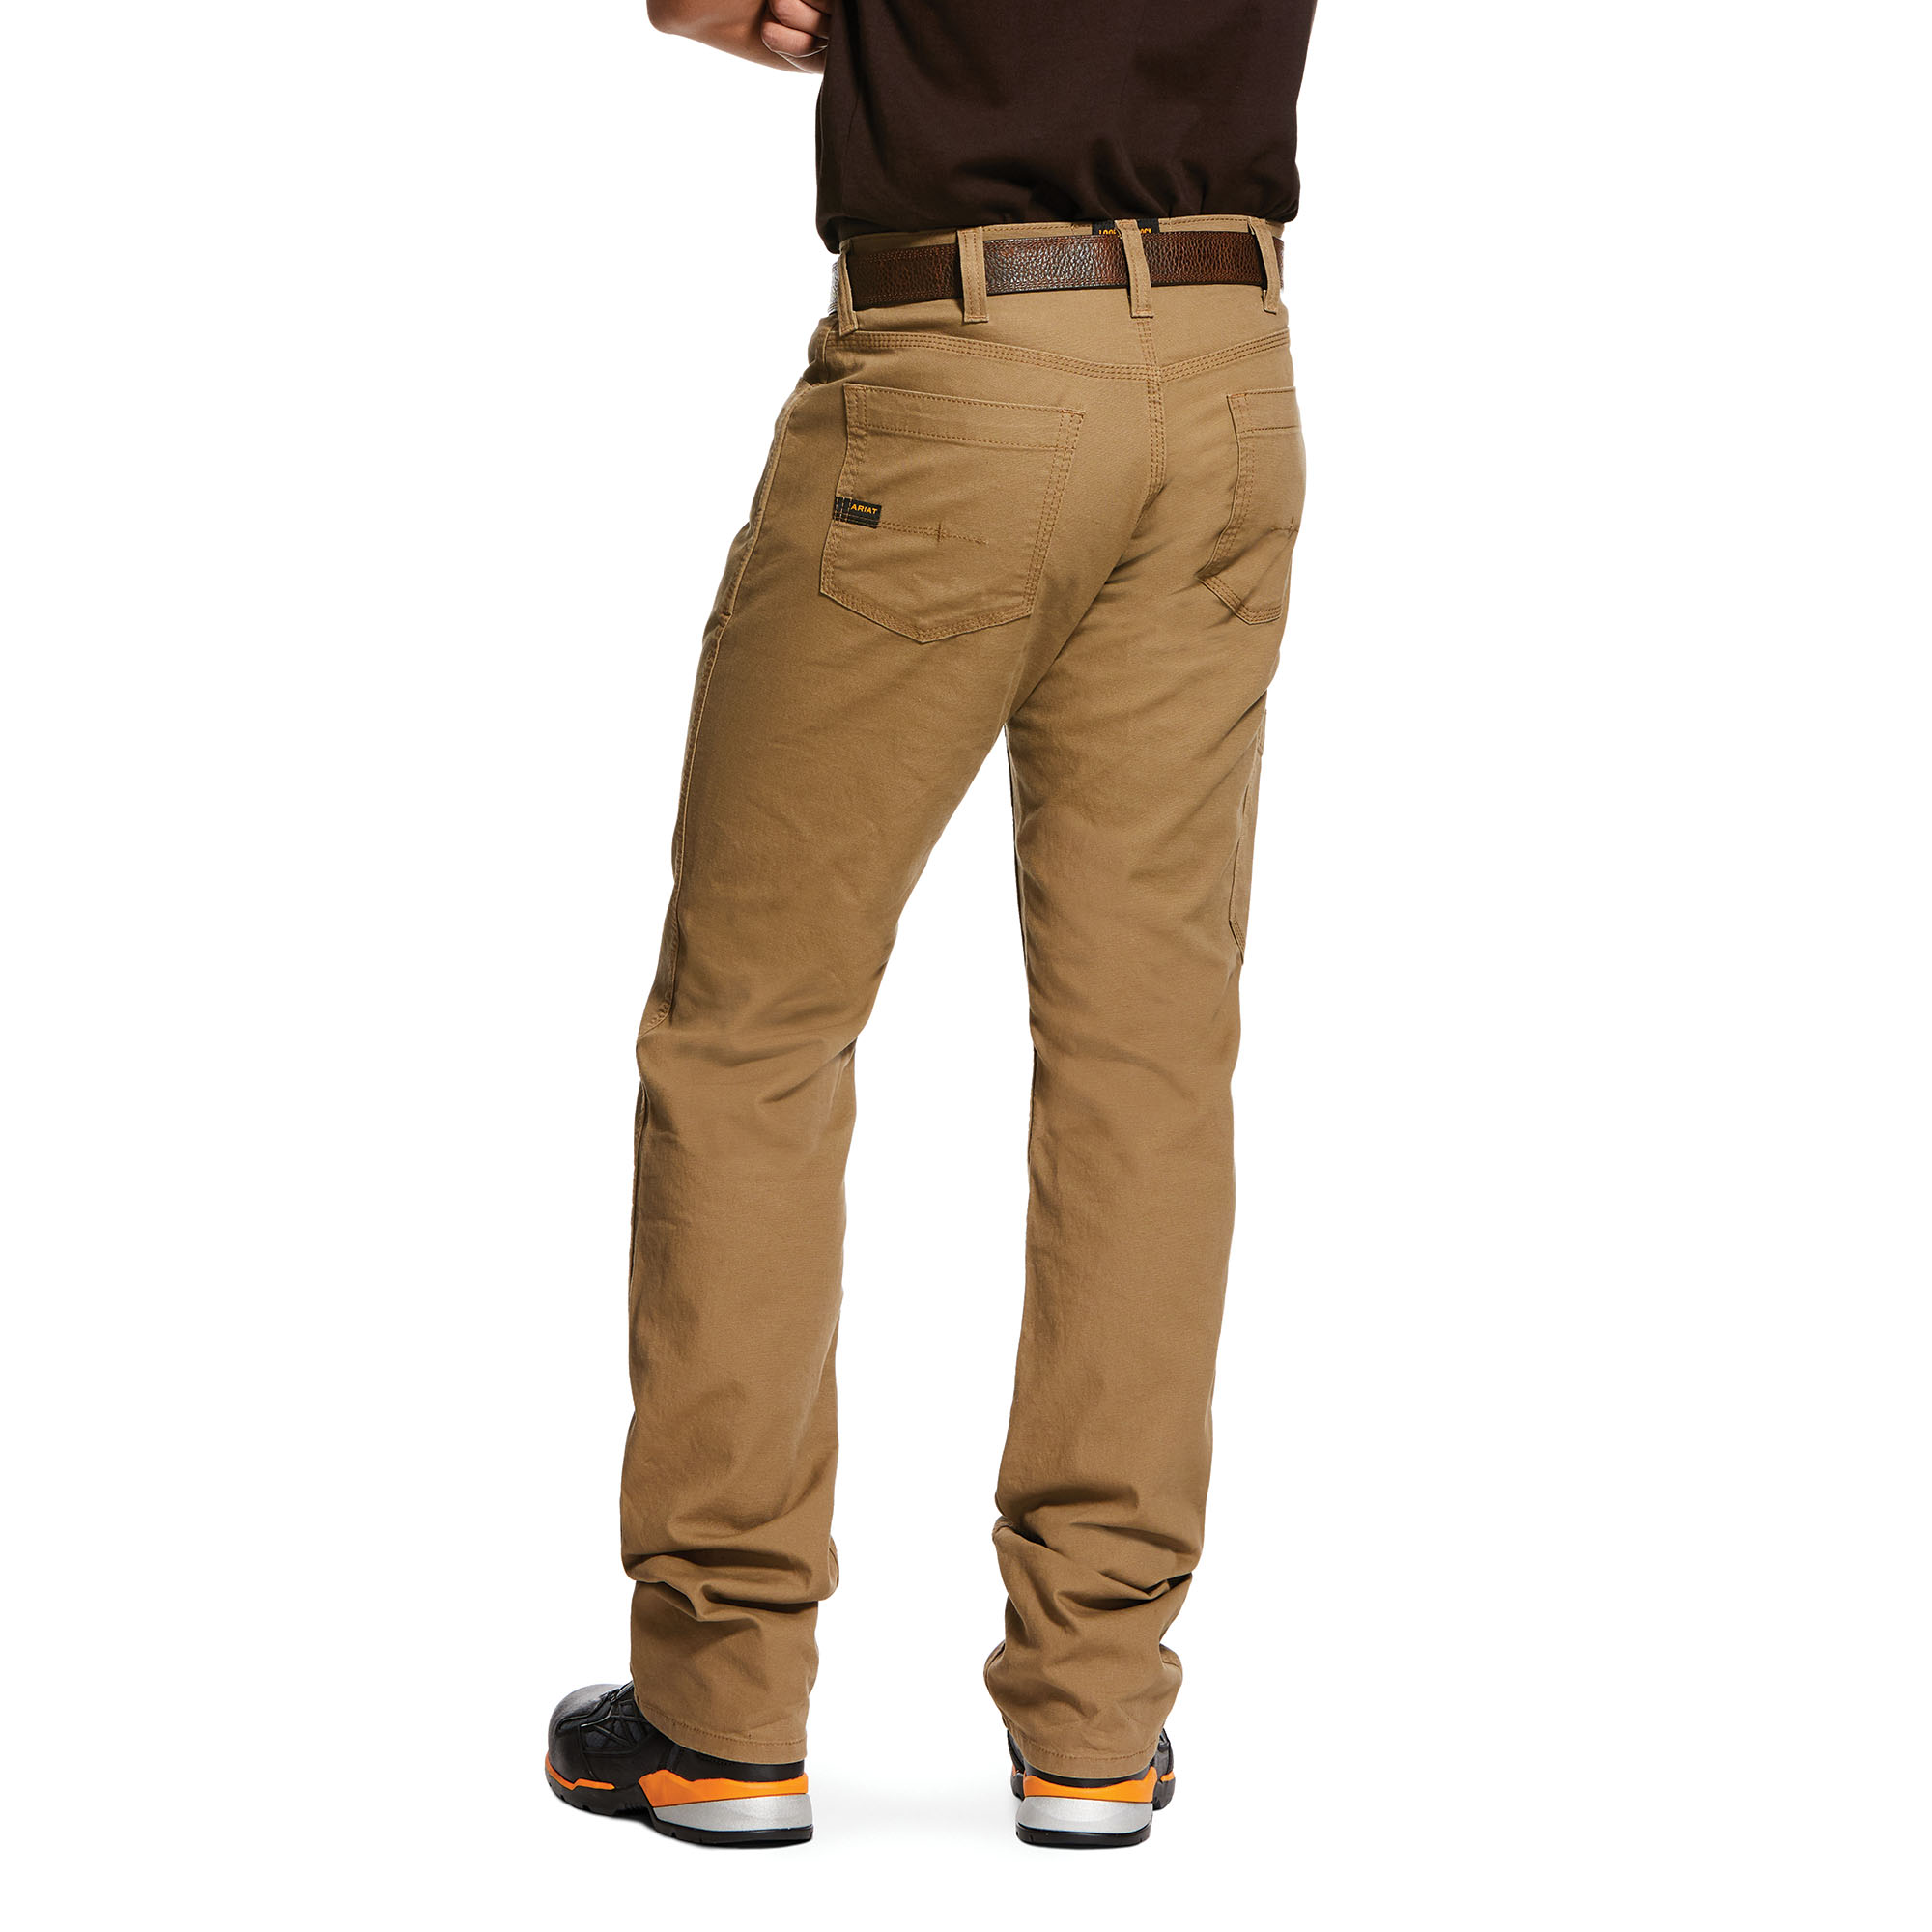 Ariat Men's Rebar M4 Low Rise Durastretch Made Tough Stackable Straight Leg Pant - image 2 of 4